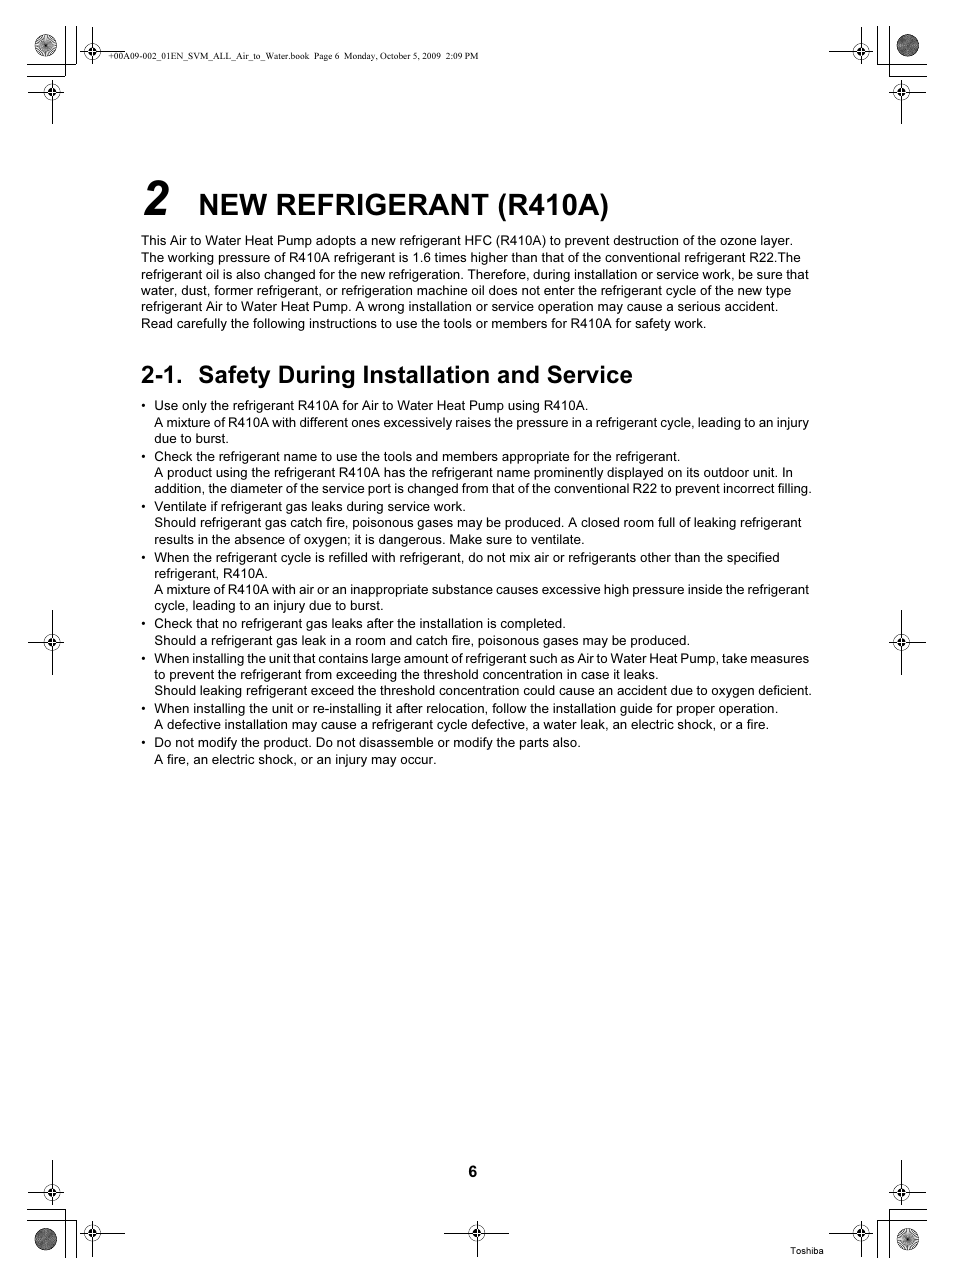 New refrigerant (r410a), 1. safety during installation and service | Toshiba HWS-802XWHT6-E User Manual | Page 7 / 168